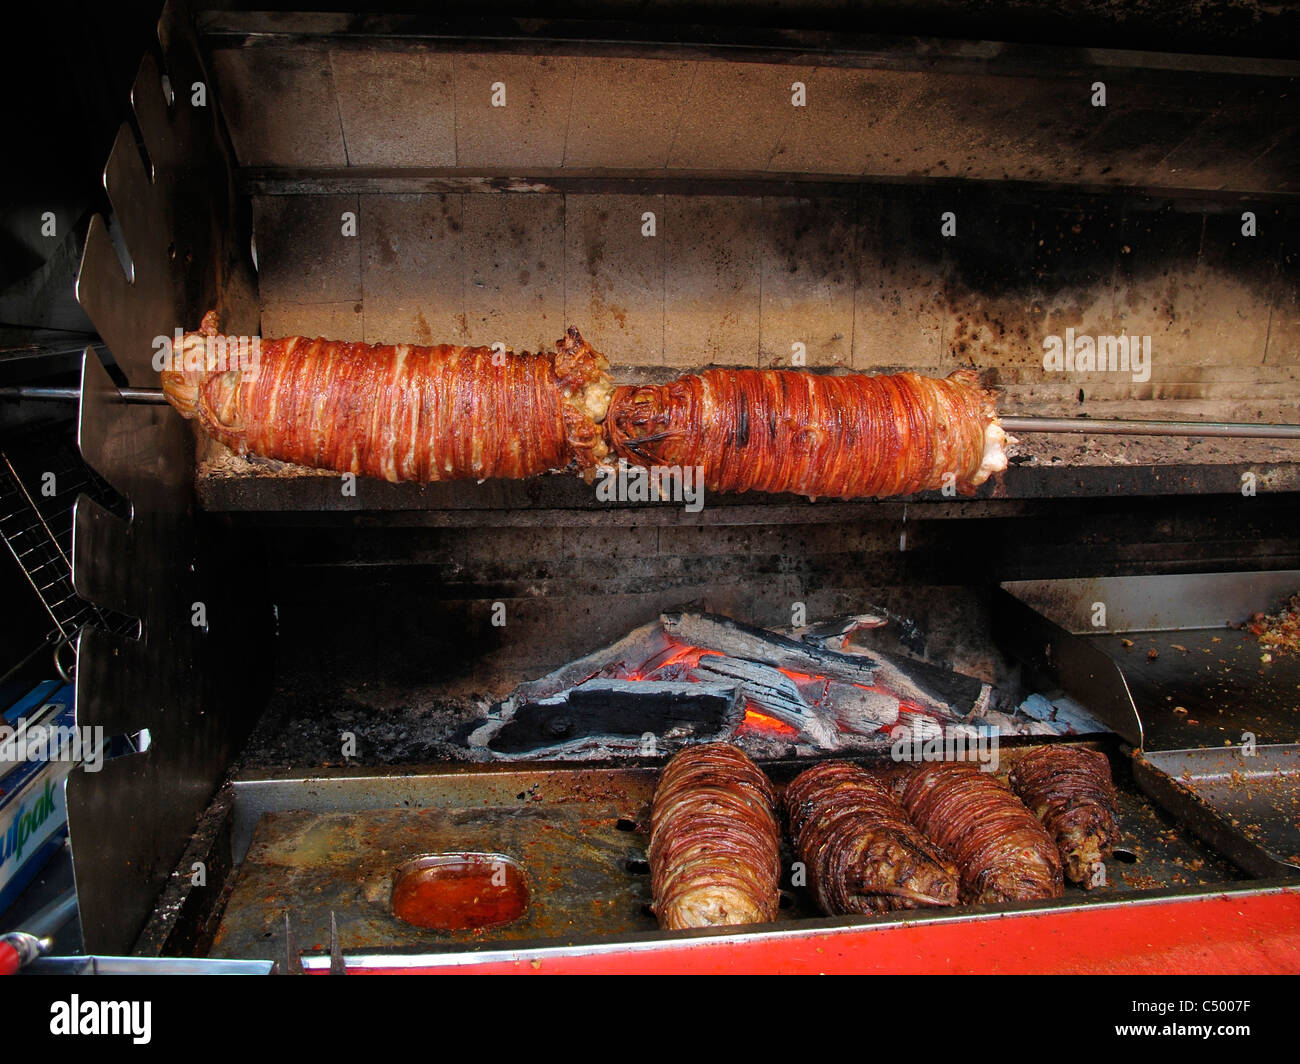 Turkey Istanbul Sultanahmet old town rolling BBQ Döner Kebab made with sheep and Lambs intestine Stock Photo